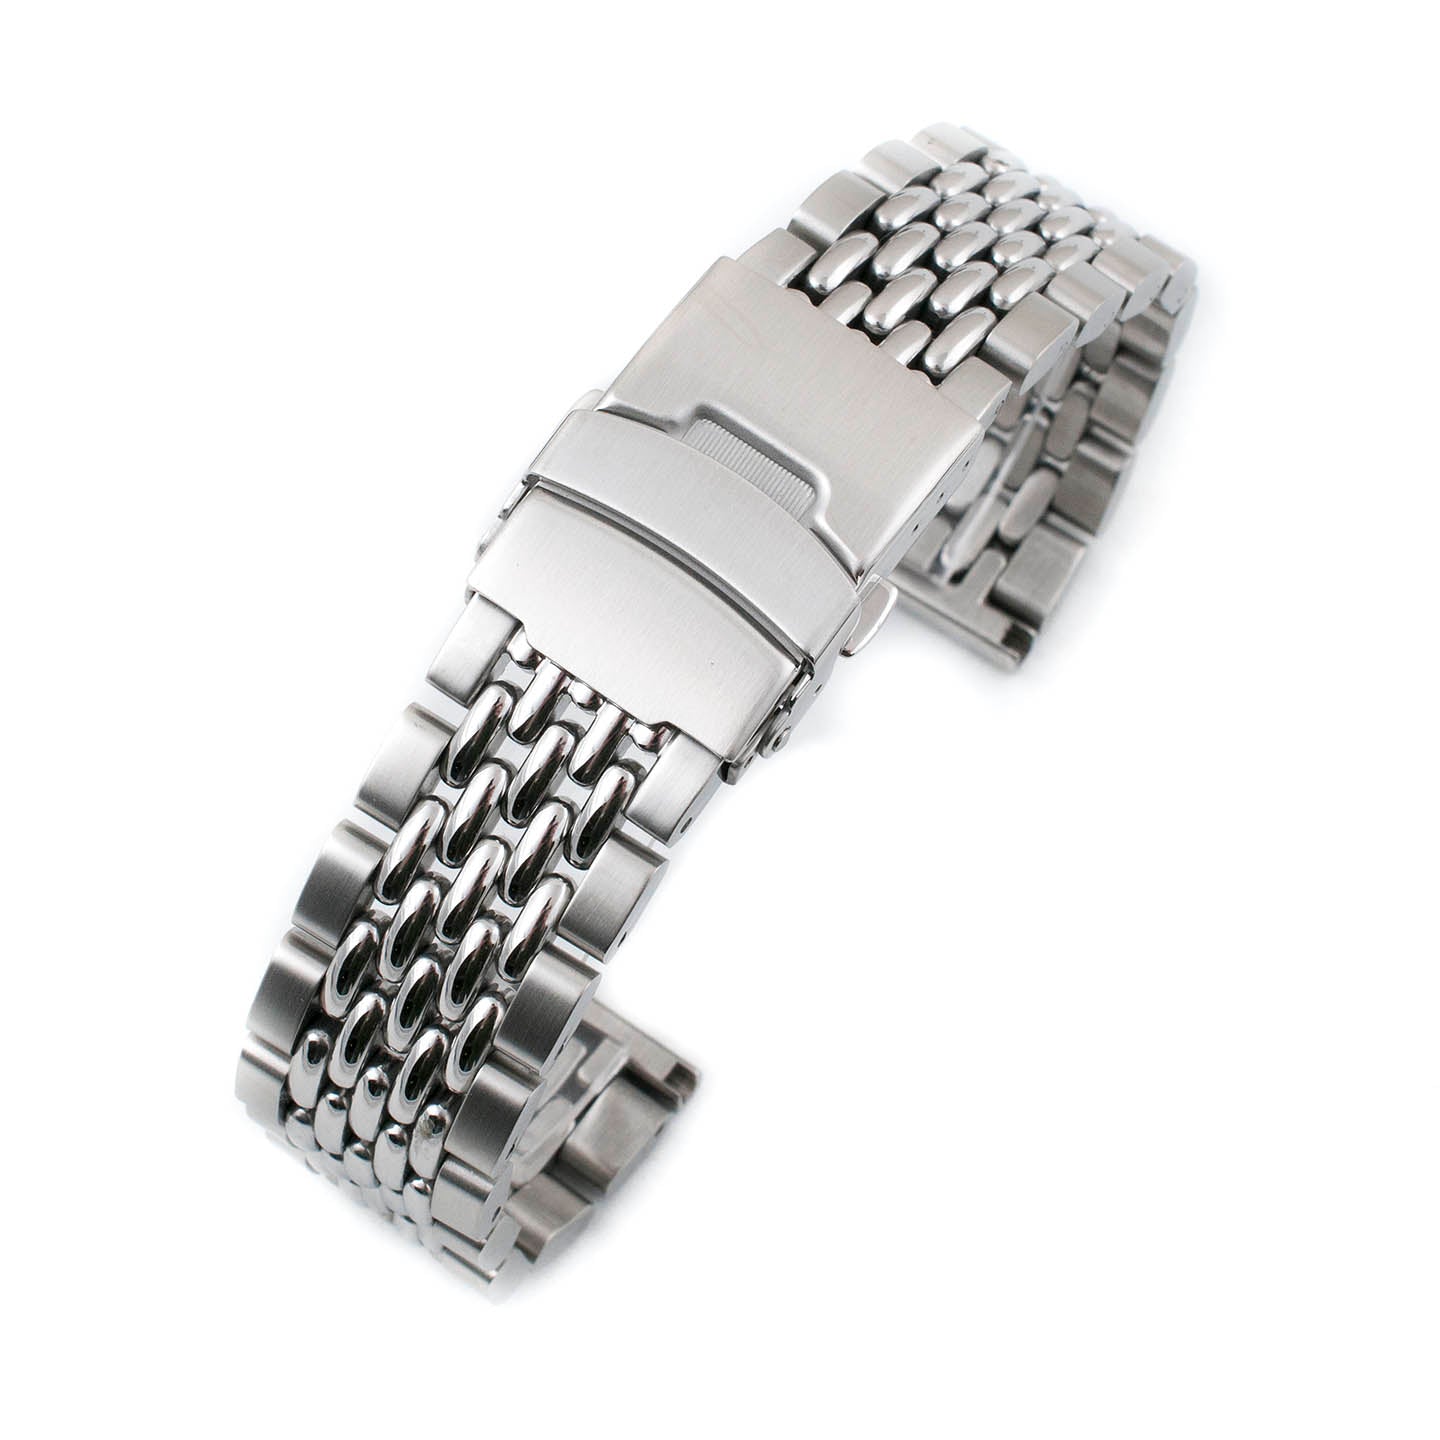 Retro Beads Of Rice Stainless Steel Bracelet | B & R Bands